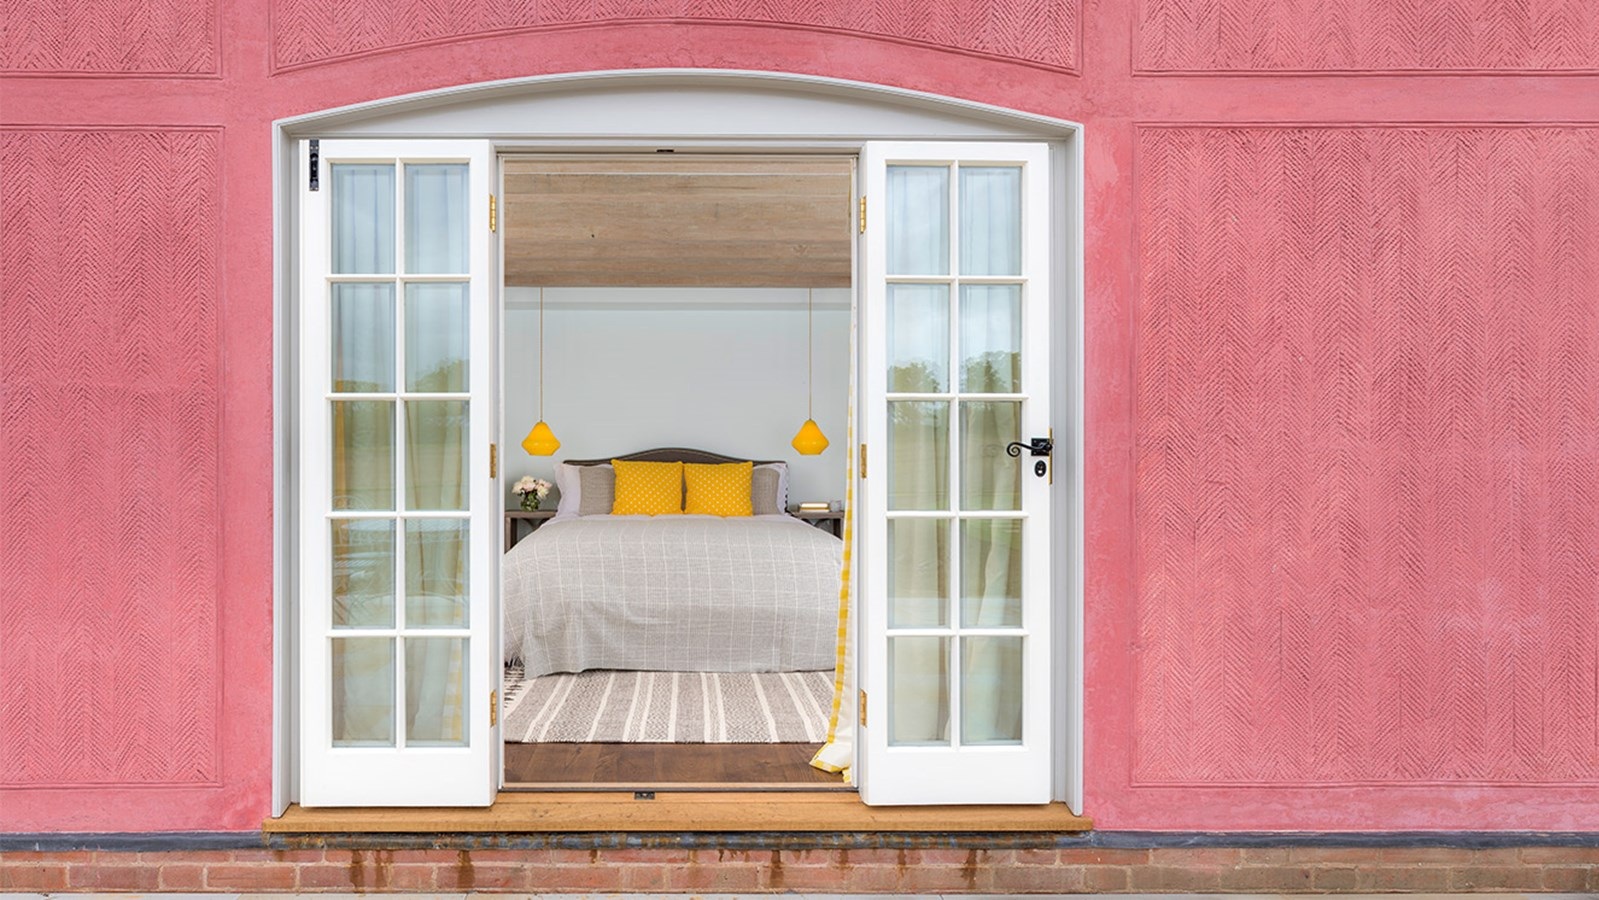 The pink theme runs throughout, with splashes of yellow in the bedrooms